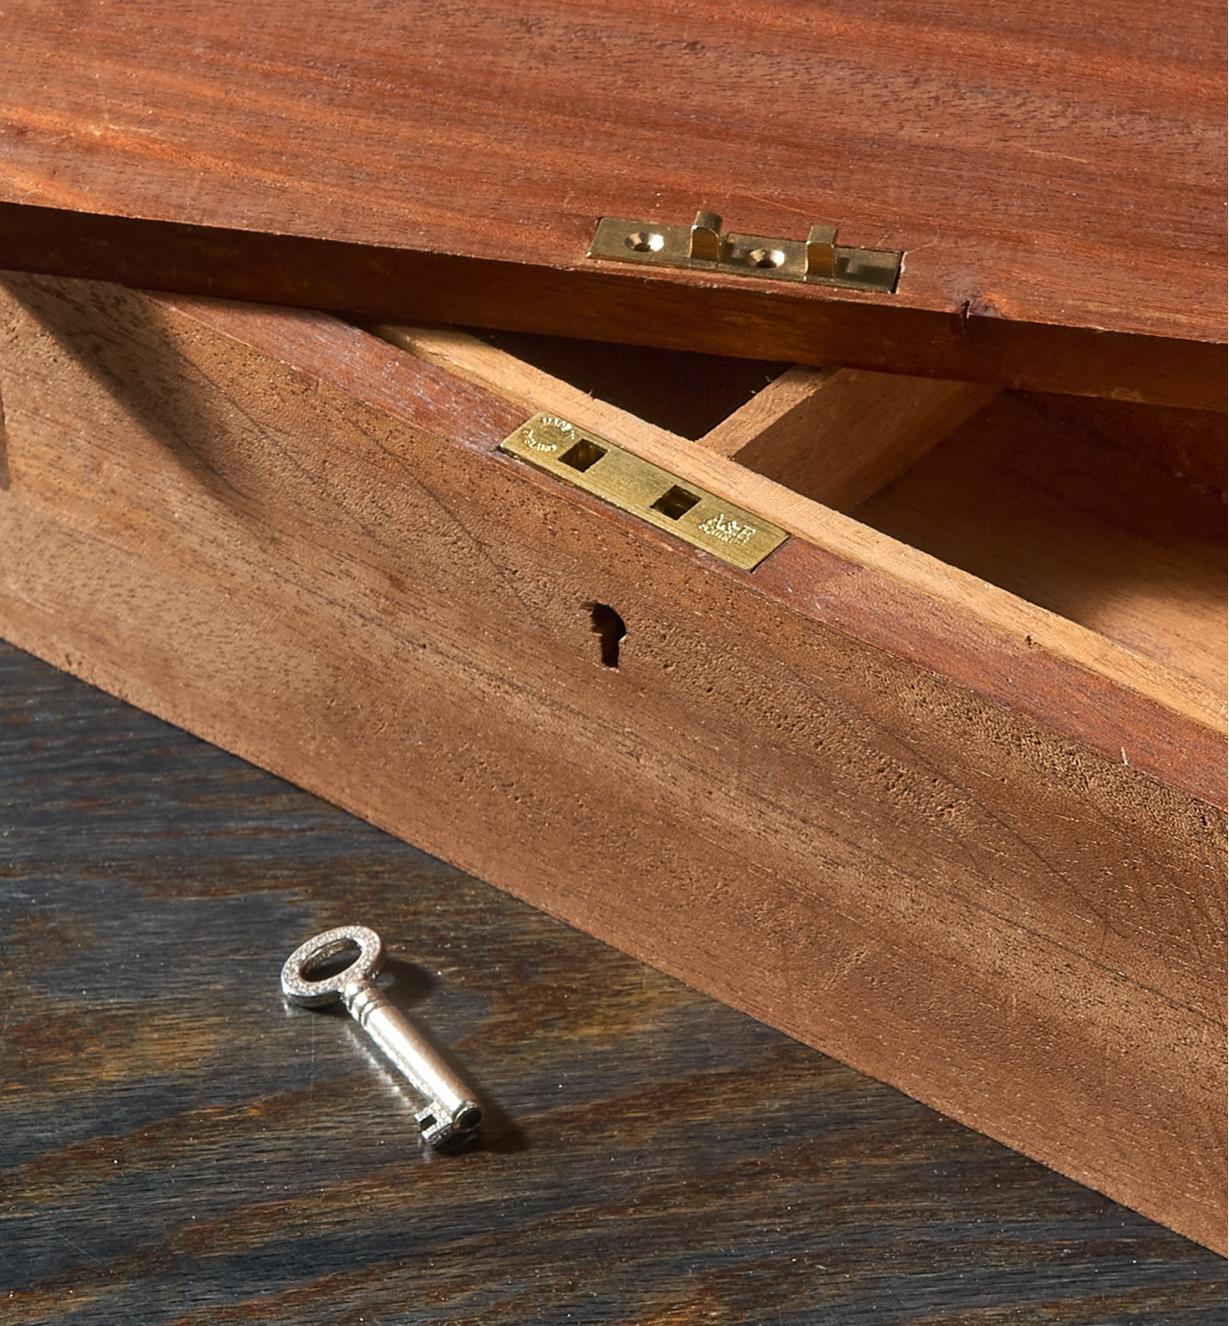 An economy box lock installed on a wooden box